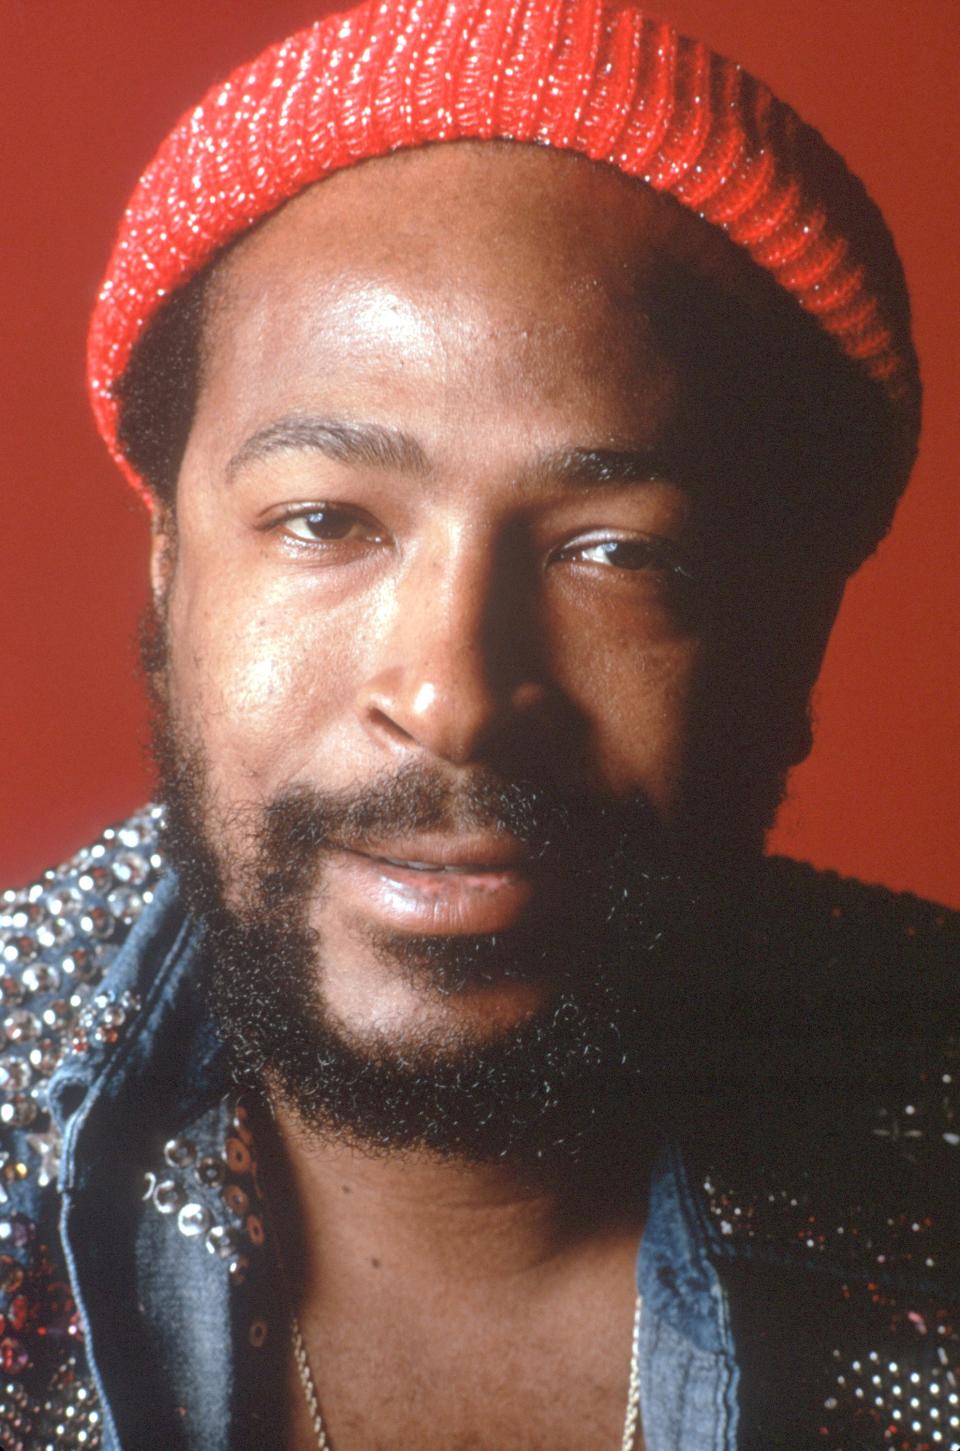 The great Marvin Gaye.